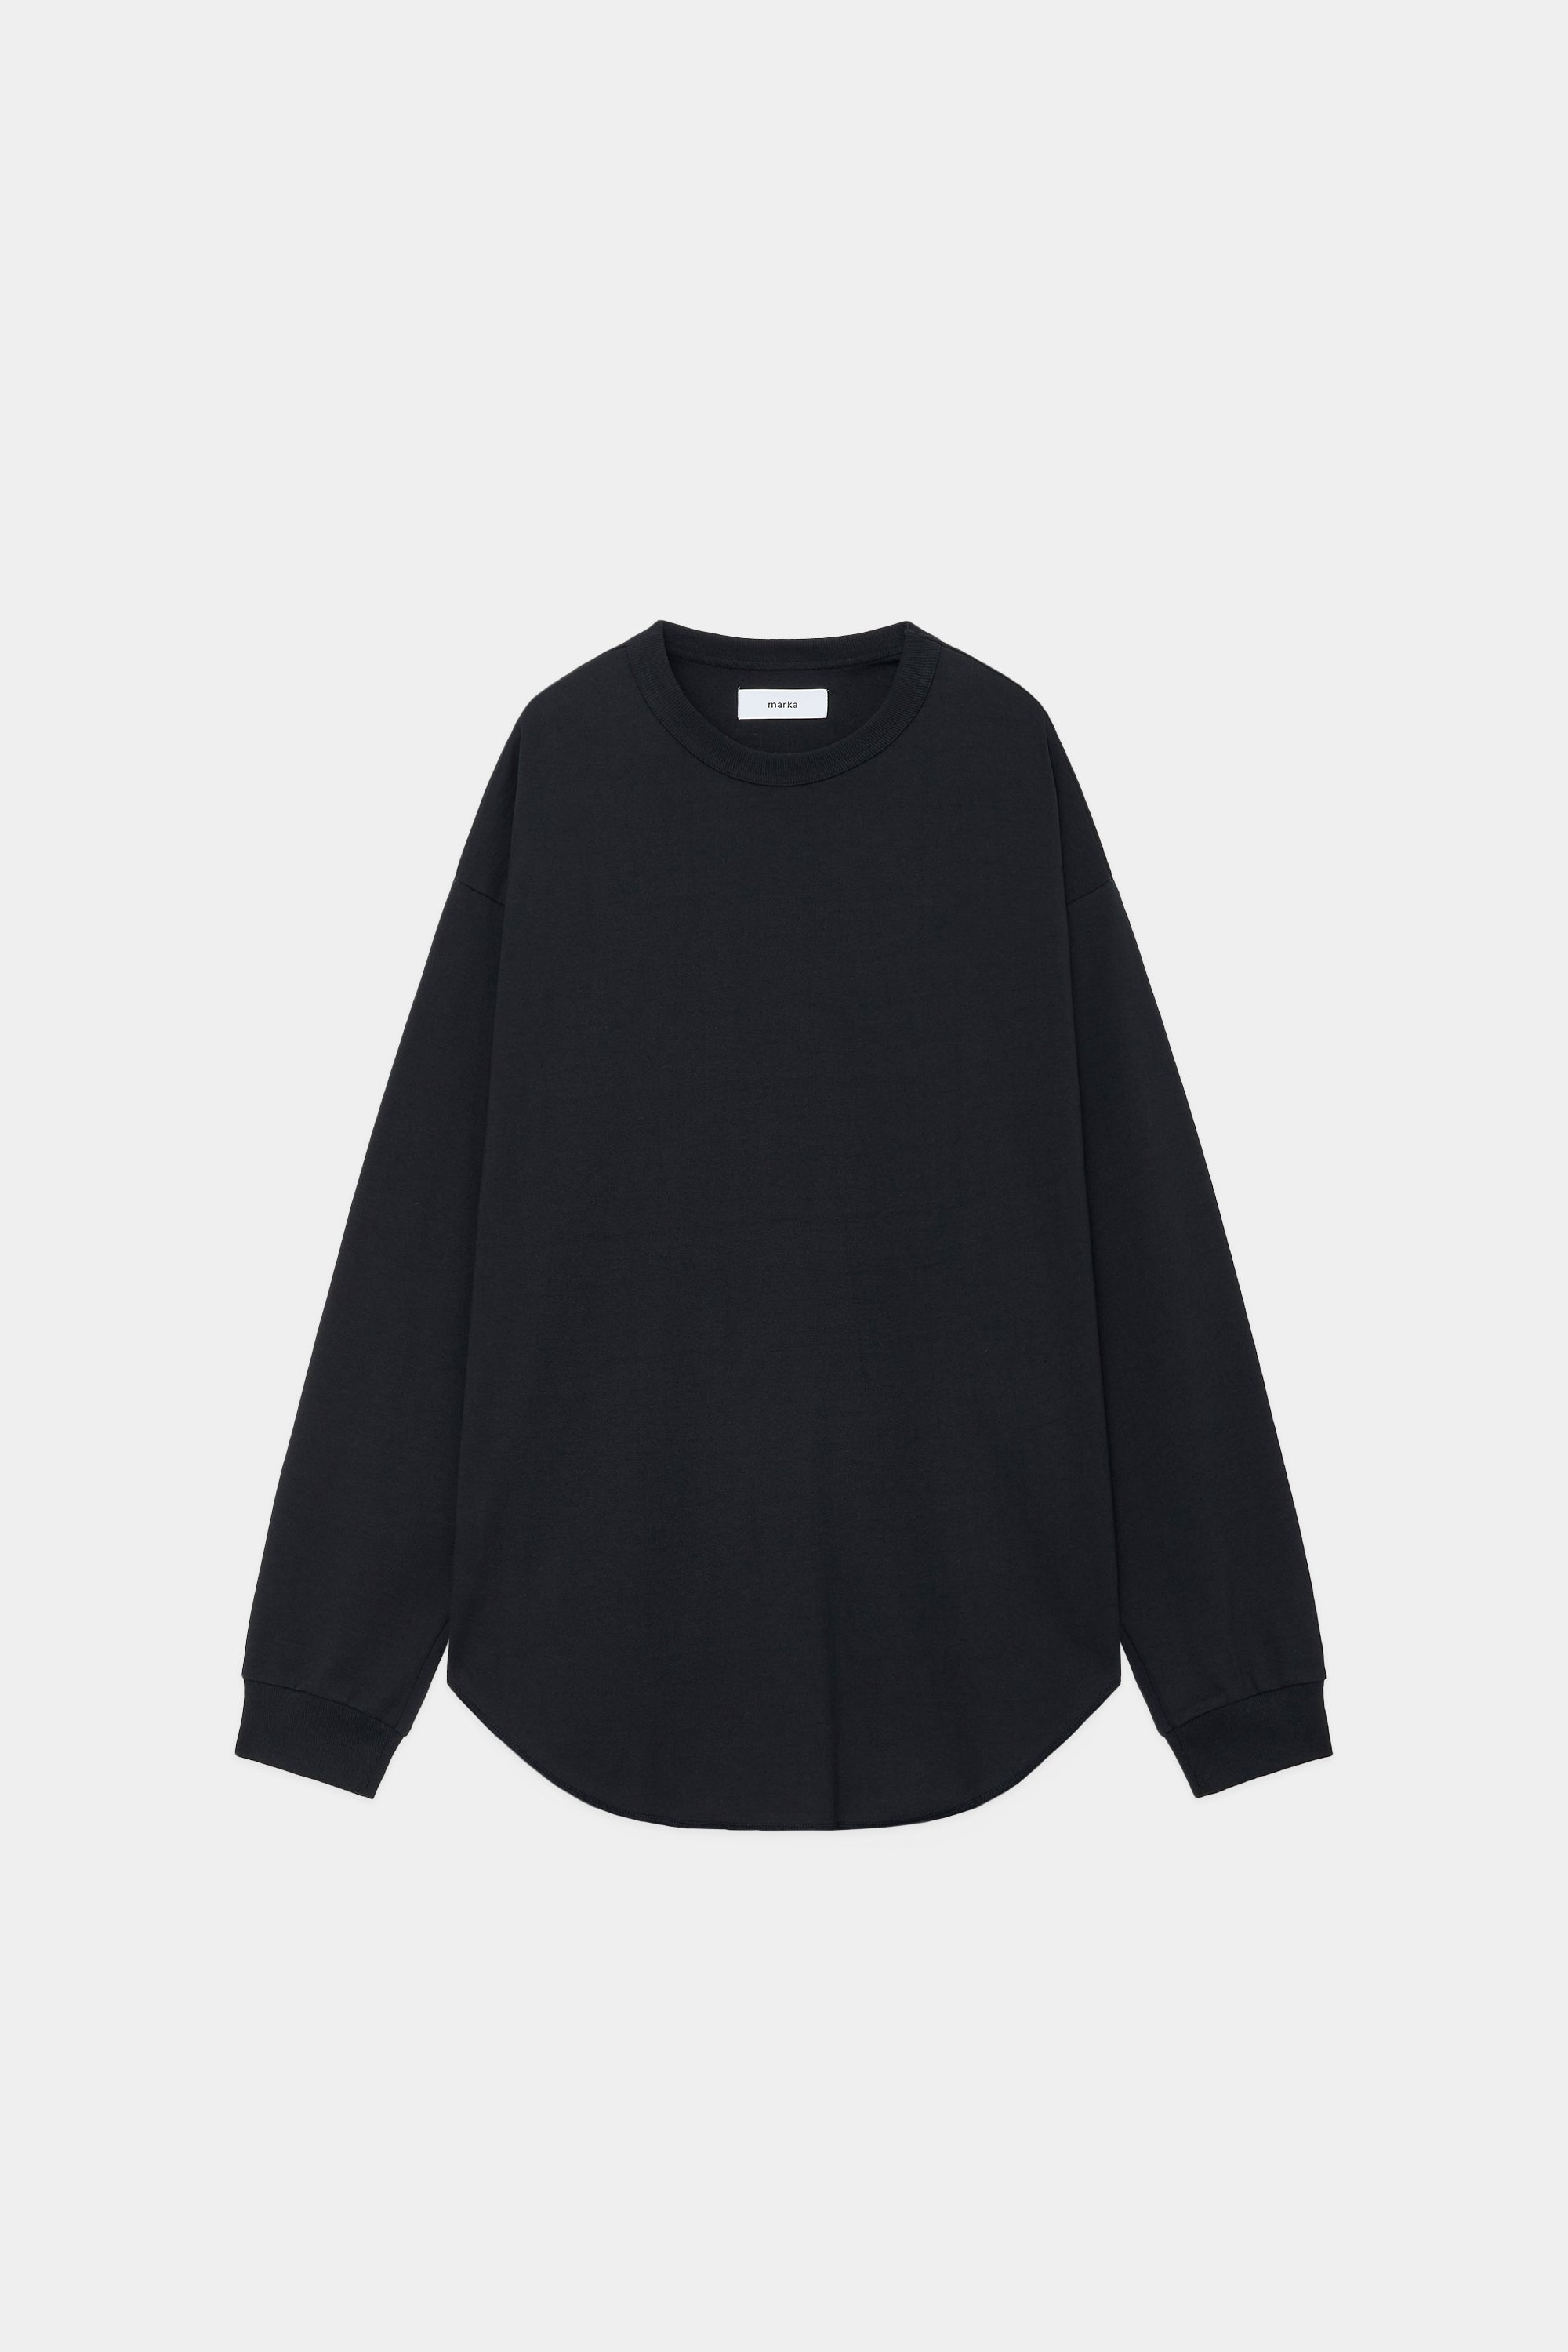 14/-  RECYCLE SUVIN ORGANIC COTTON KNIT BASE BALL TEE L/S, Black